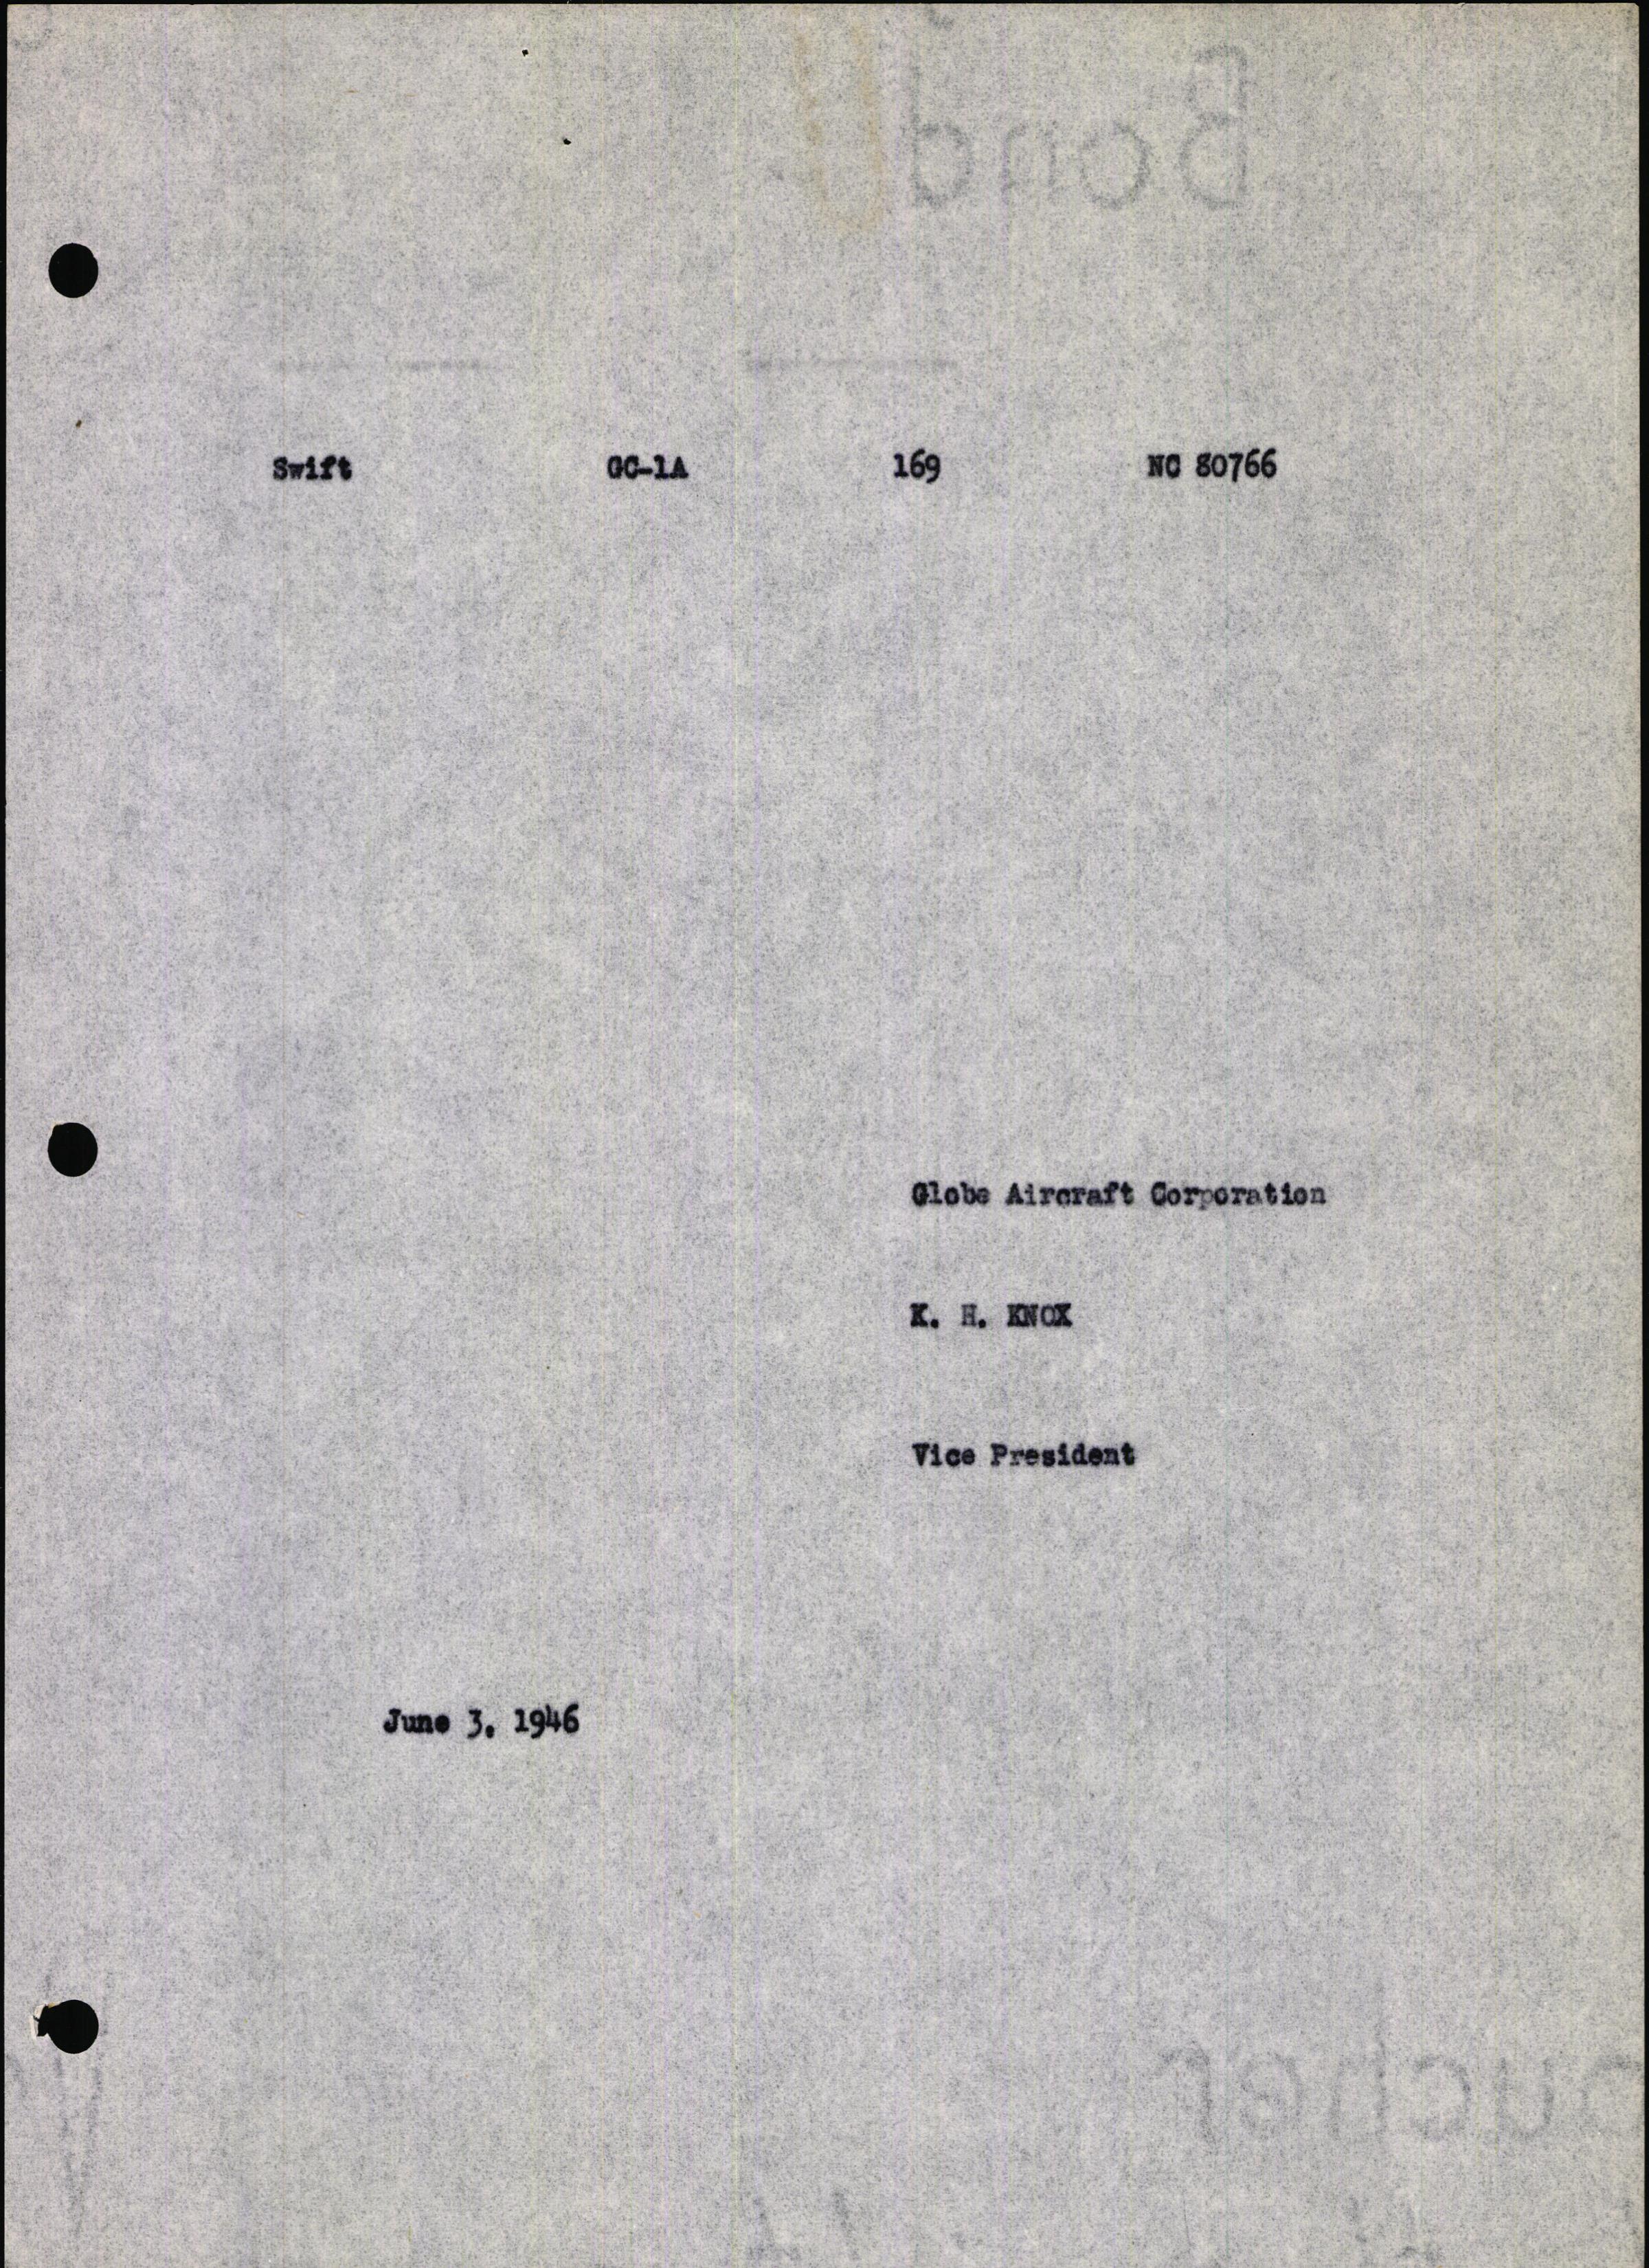 Sample page 7 from AirCorps Library document: Technical Information for Serial Number 169